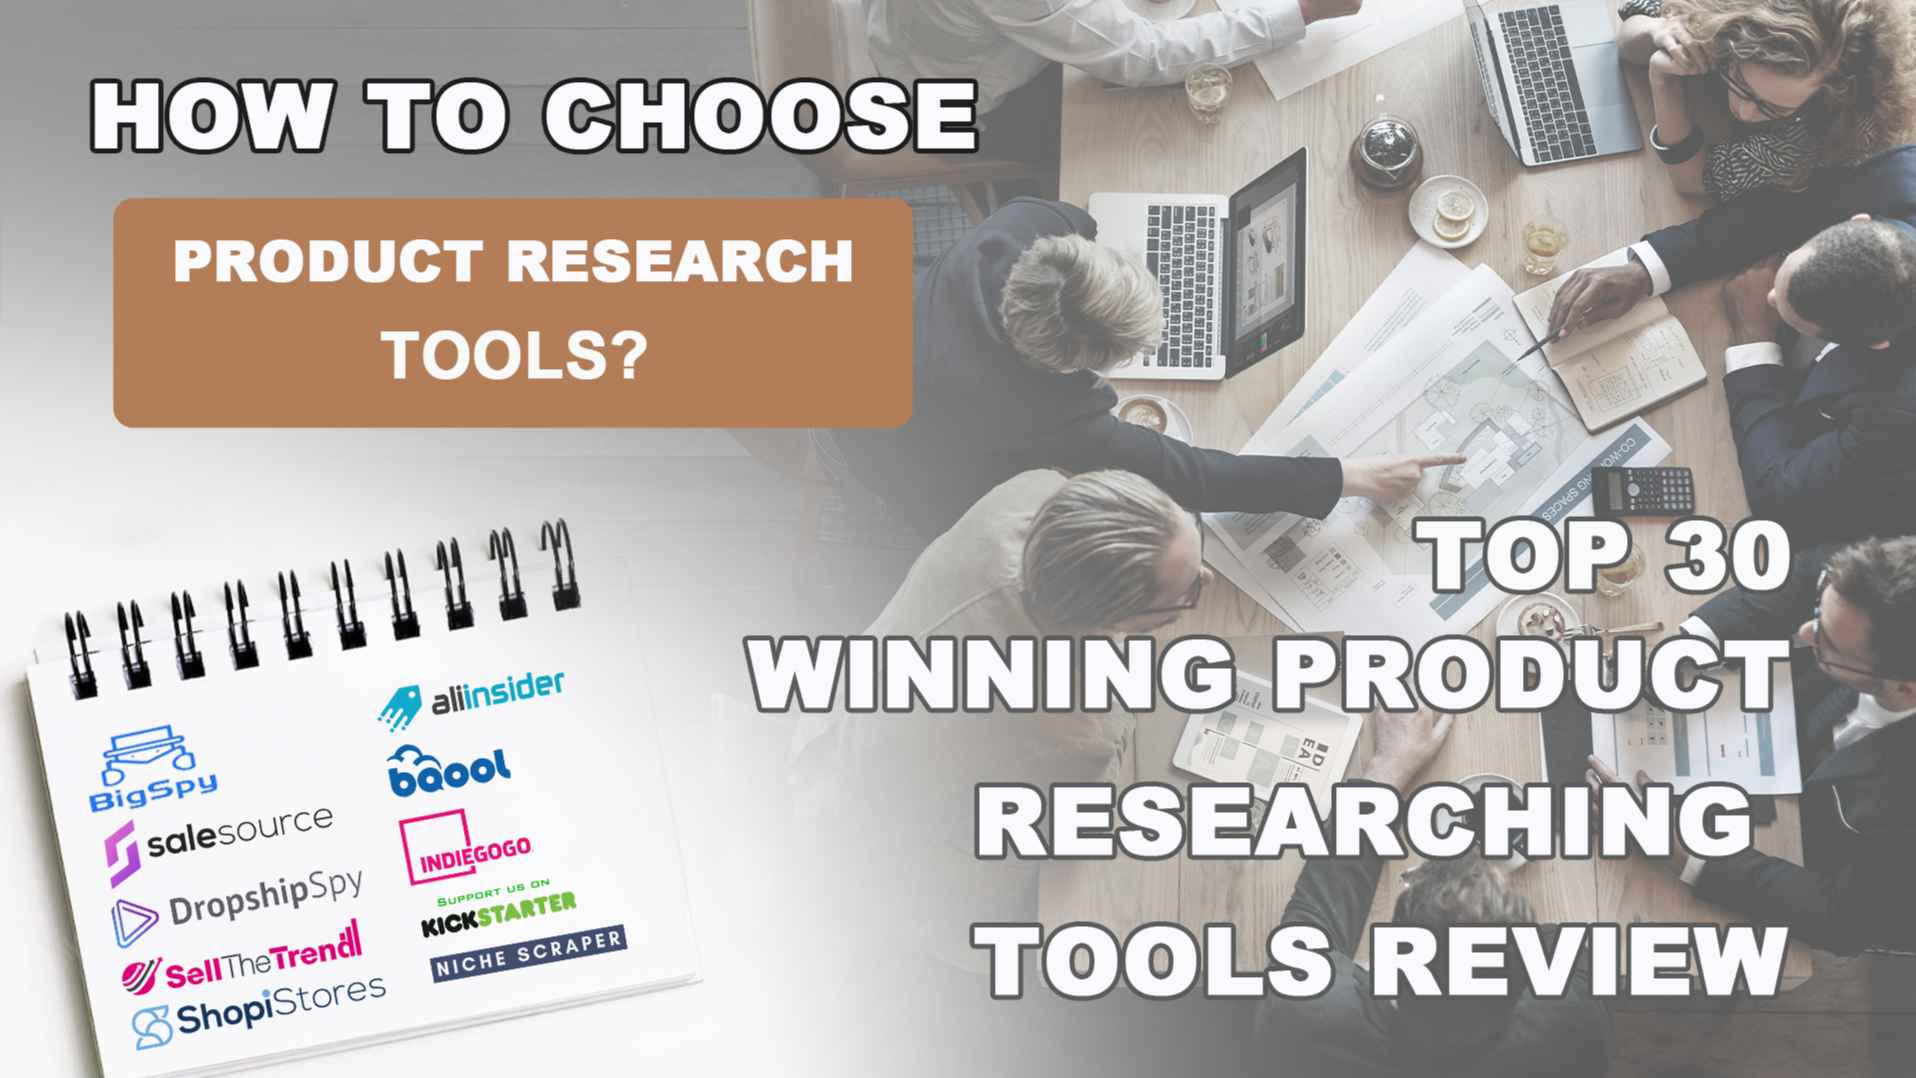 How to Choose Product Research Tools?